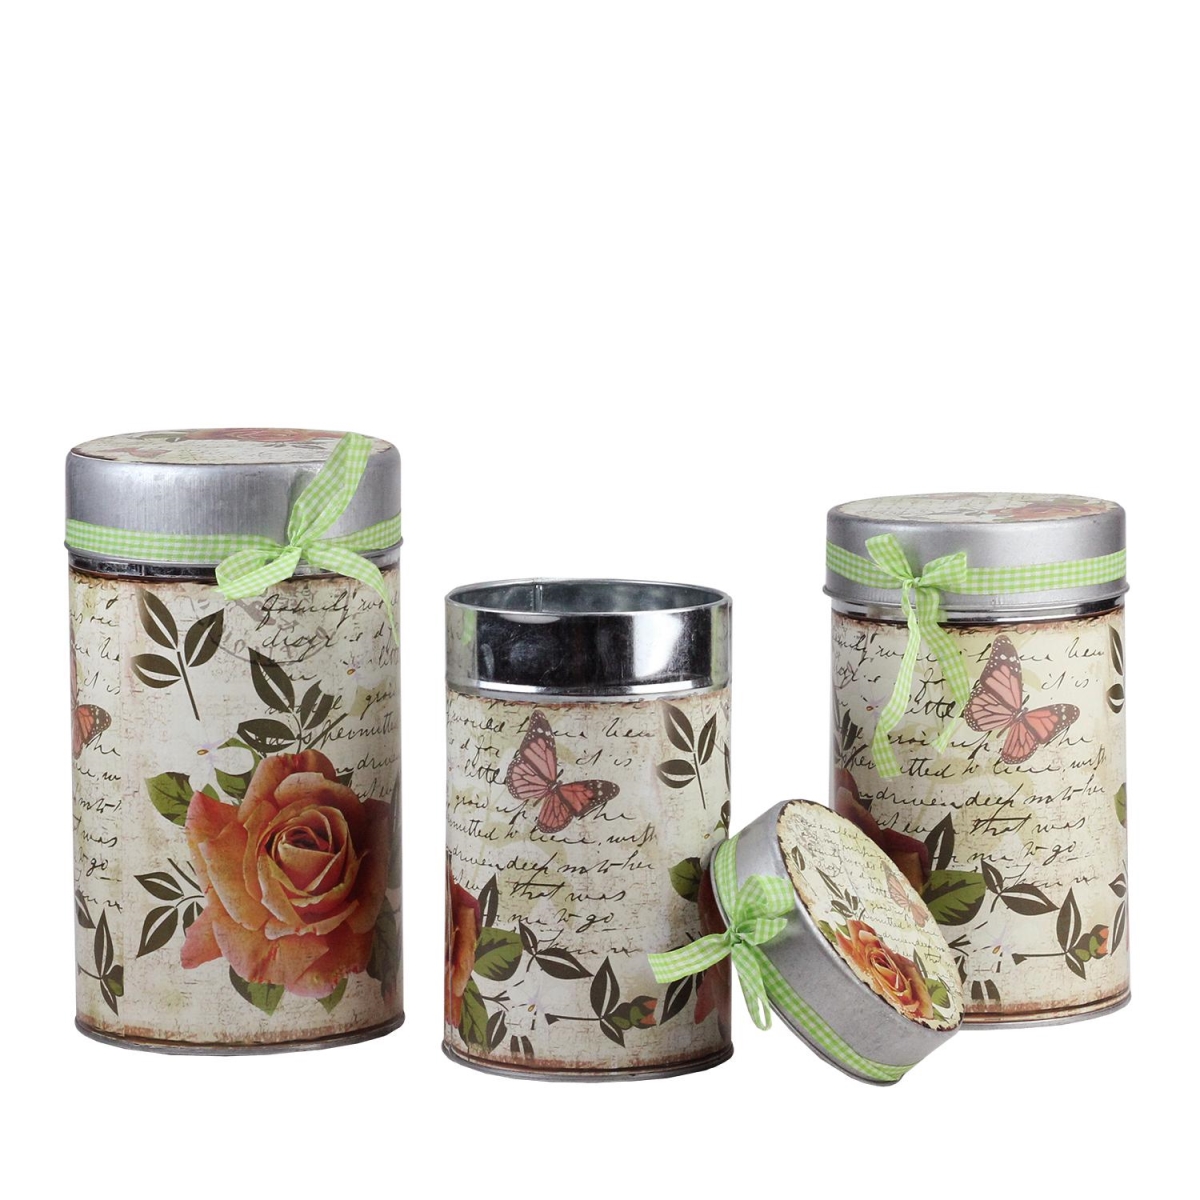 32555265 7.5 X 8.5 X 9.5 In. Vintage Spring Rose & Butterfly Stackable Metal Canisters, Set Of 3